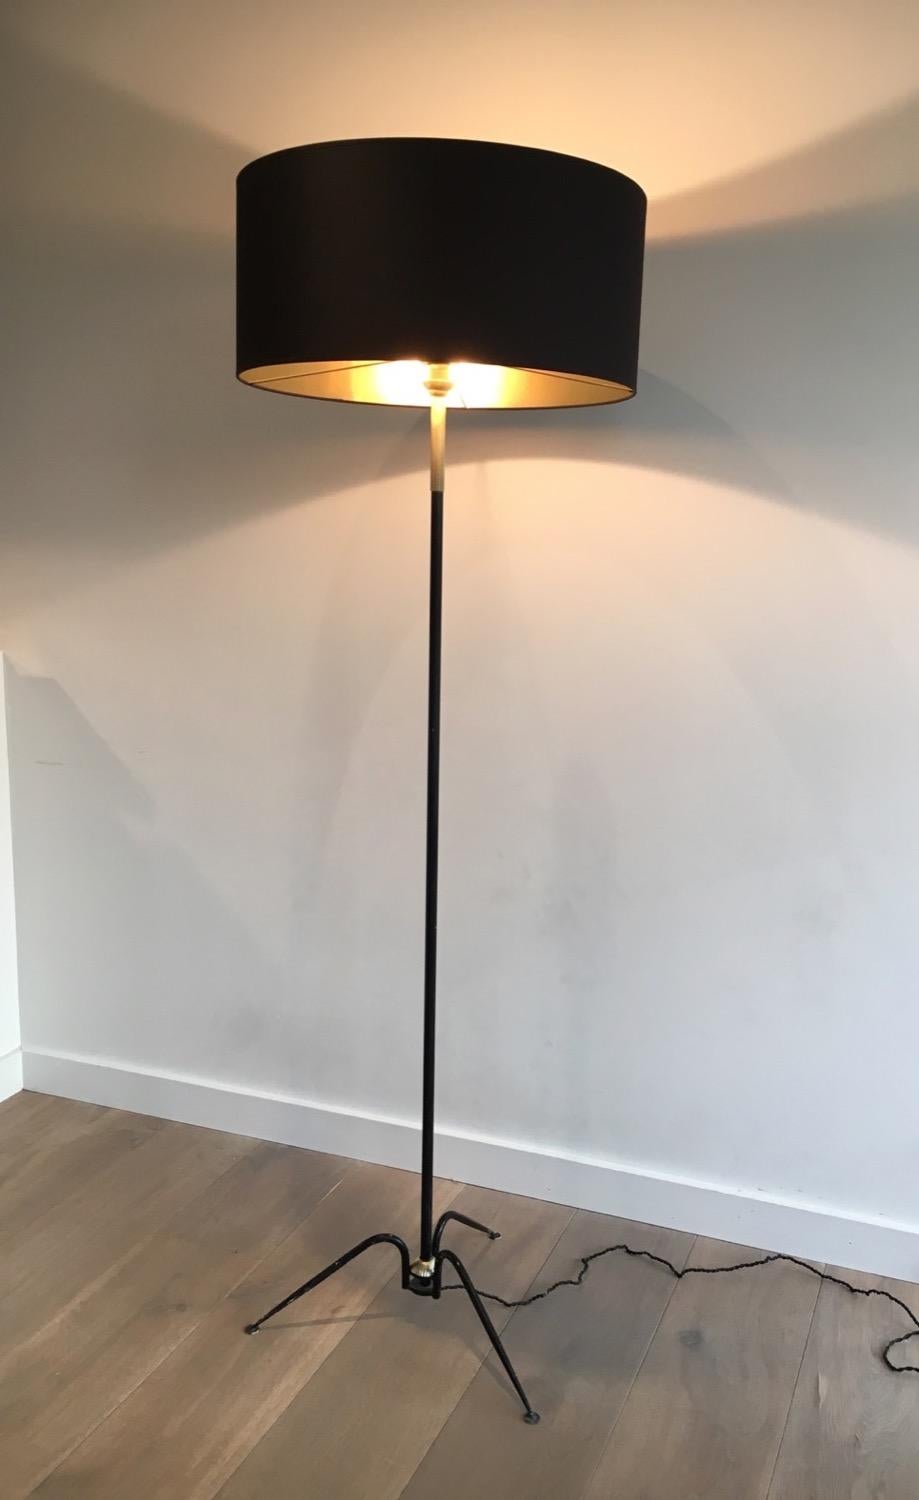 This rare and design floor lamp is made of black lacquered metal and brass. New shade made of black shintz, Gold inside. This is a French work in the style of Lunel. Circa 1950